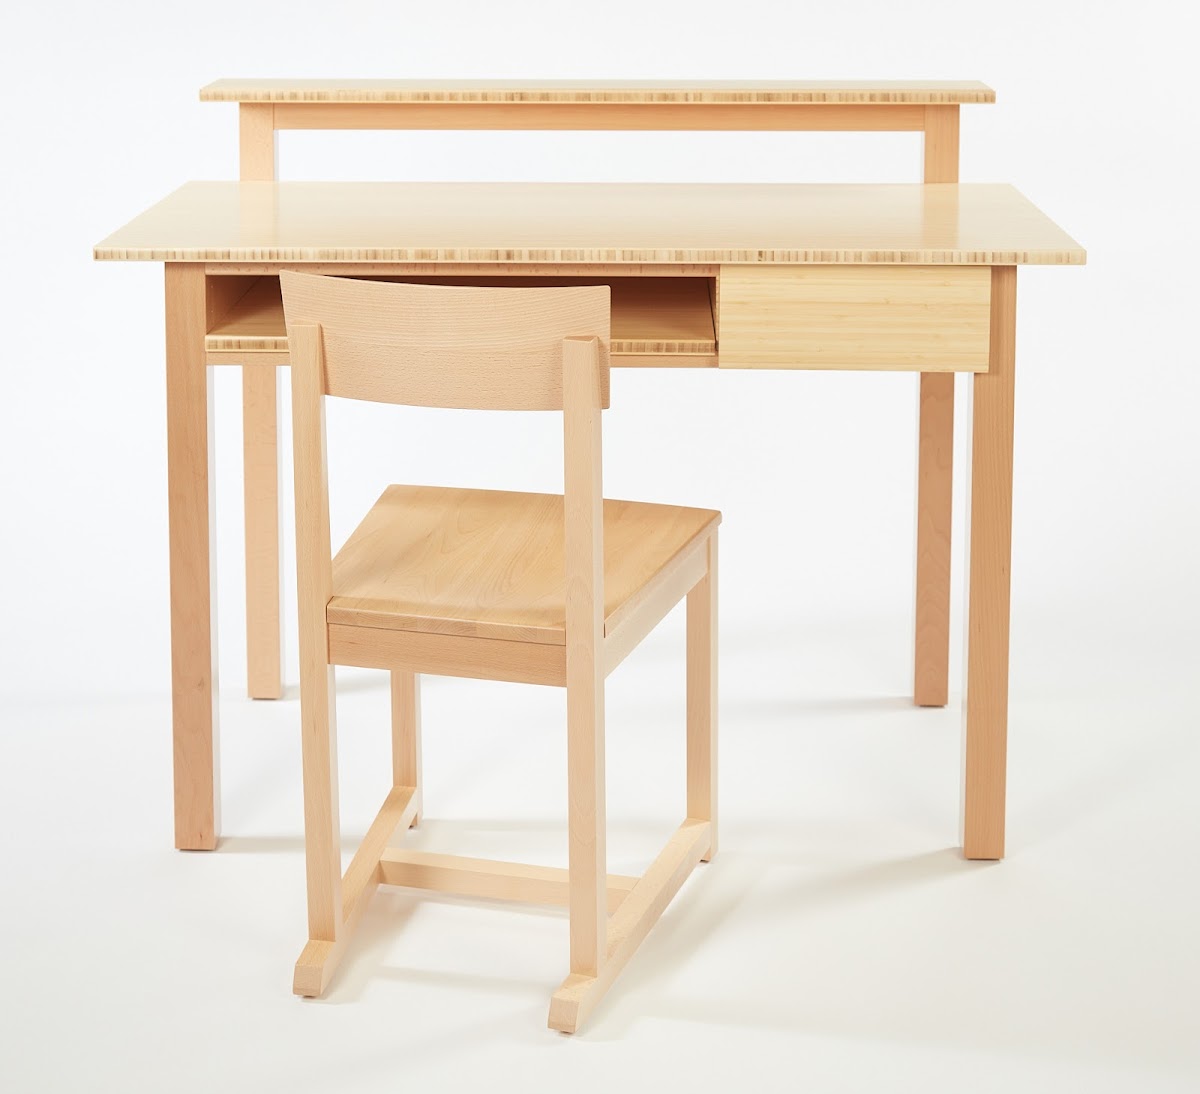 Wooden chair and desk for new North Hall RISD residence, by Professors John Dunnigan MFA 80 ID and Lothar Windels BID 96